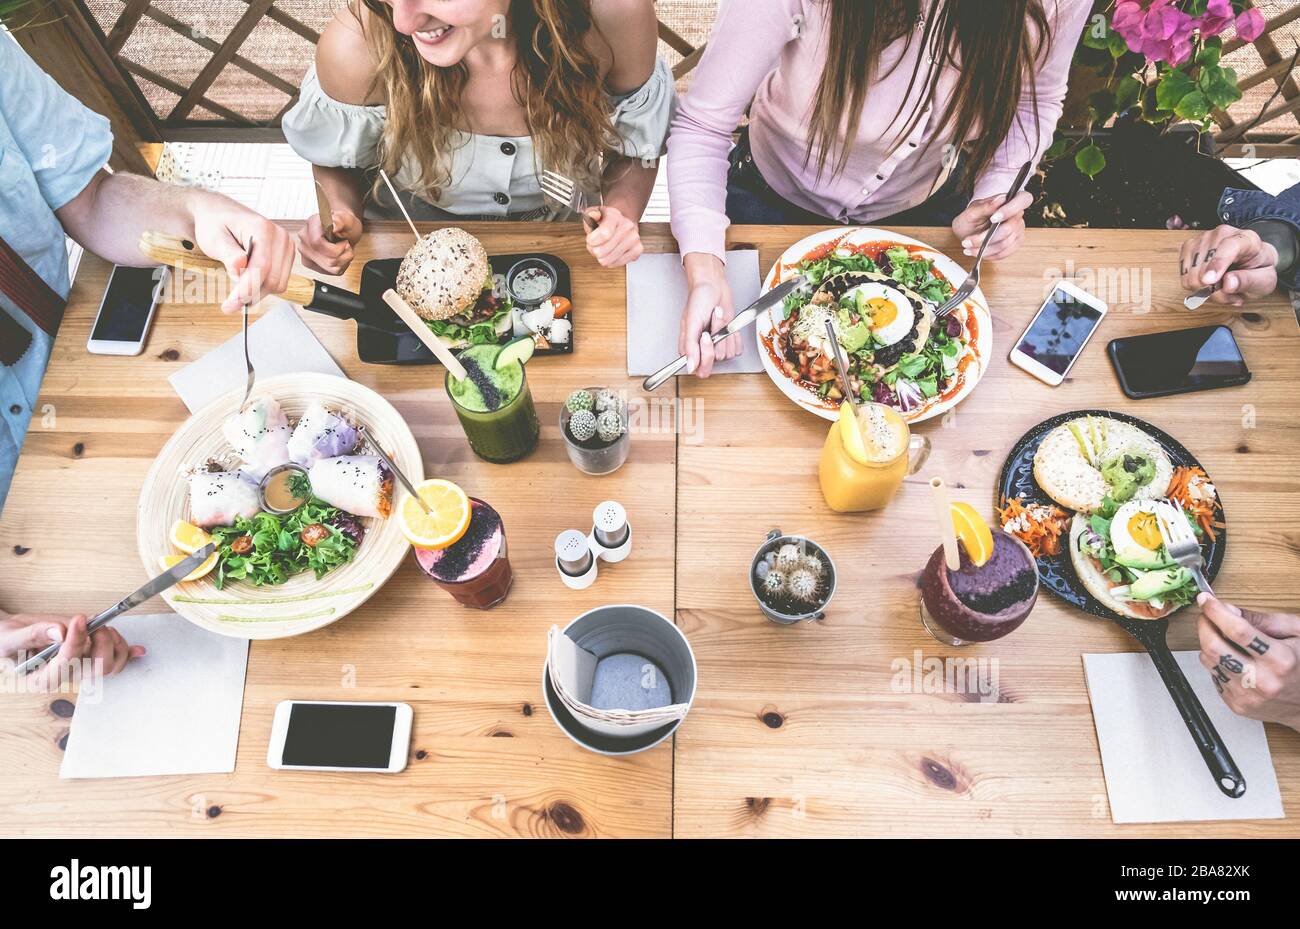 Young people eating brunch and drinking smoothie bowl at vintage bar - Happy people having a healthy lunch and chatting in trendy restaurant - Food tr Stock Photo